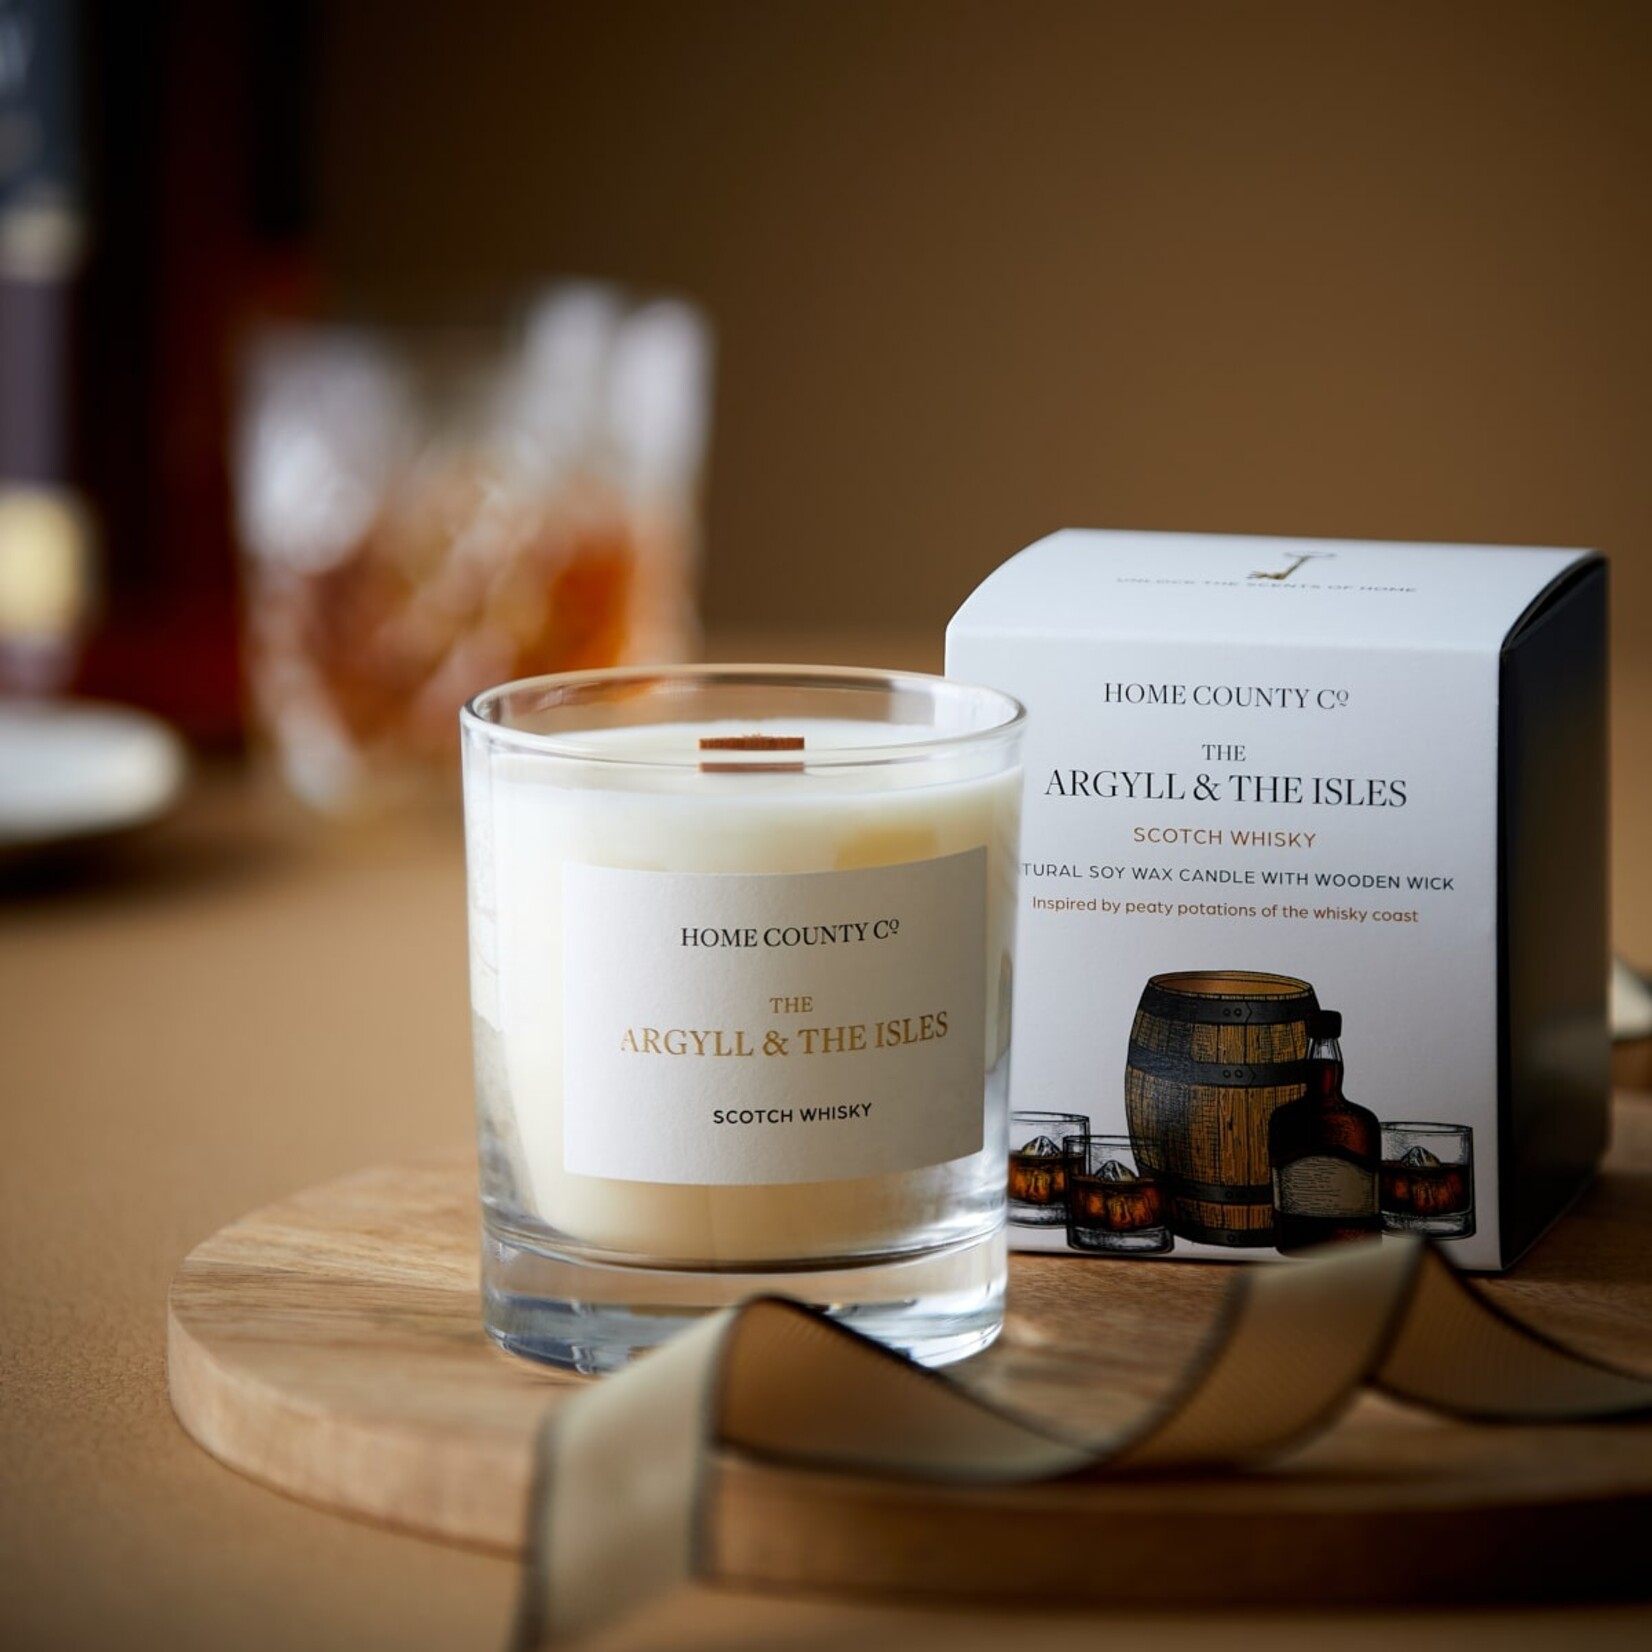 Home County Co. British Soy Candles